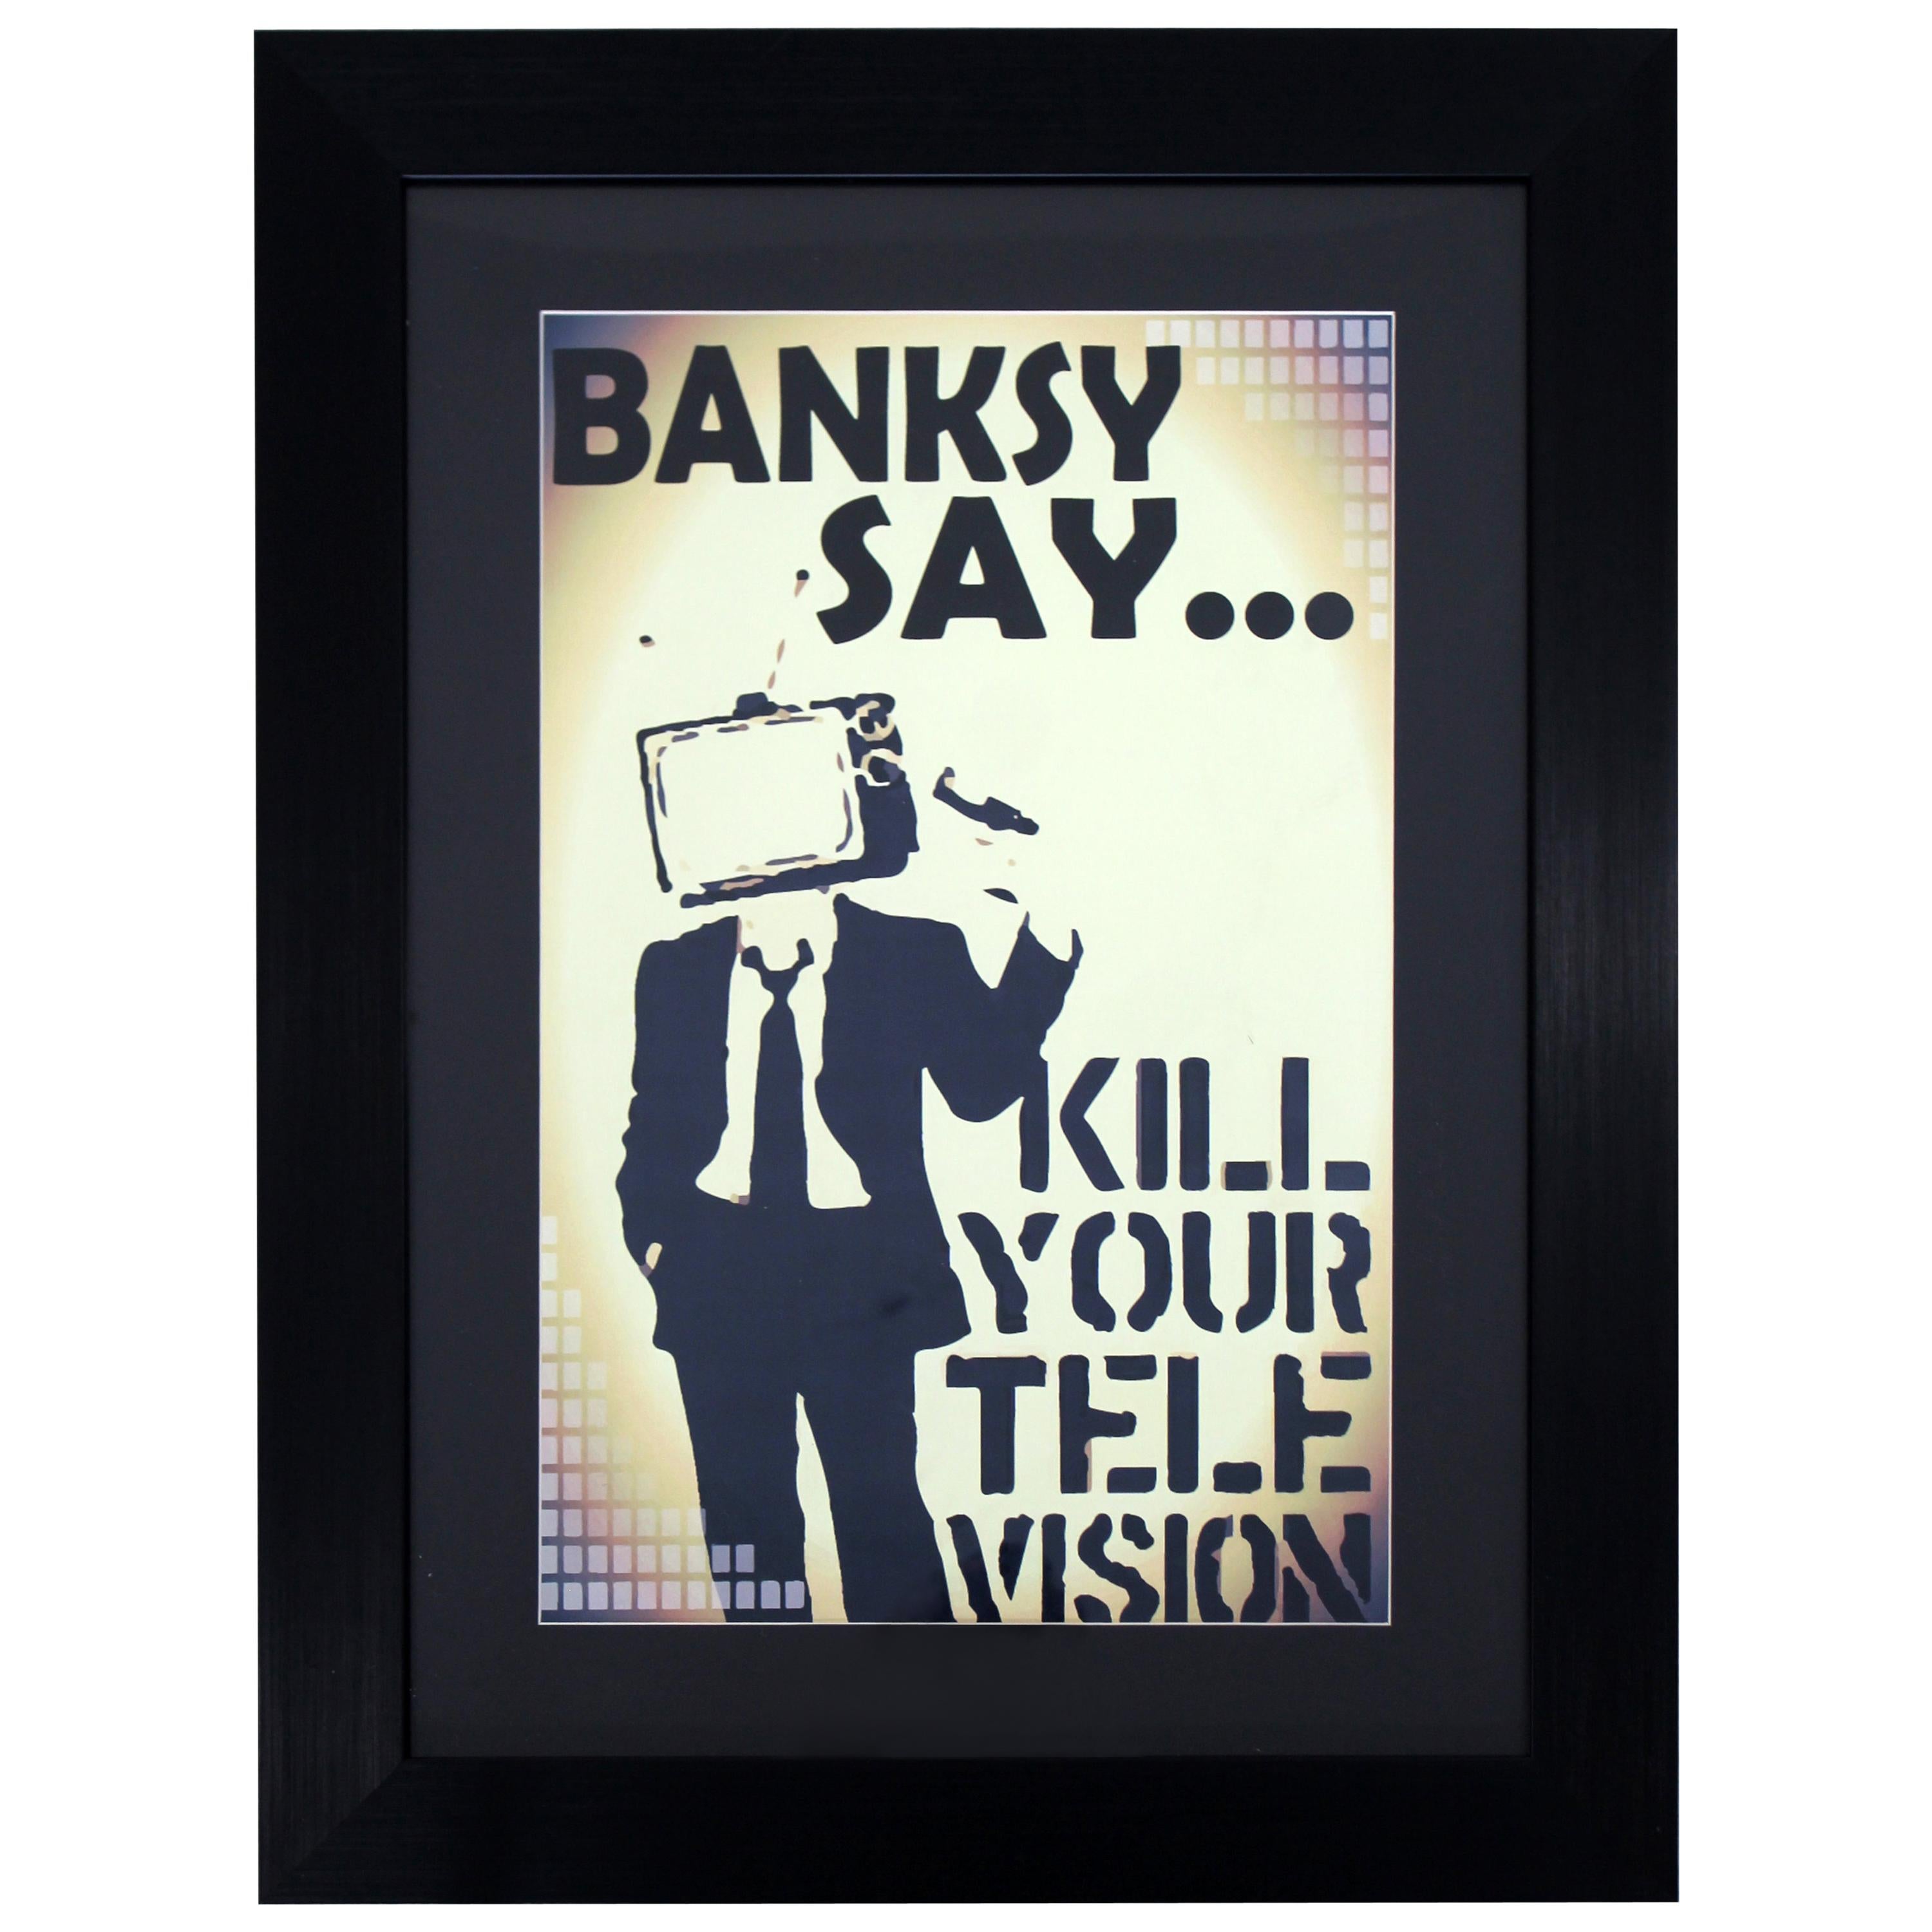 Contemporary Framed Banksy Offset Lithograph Kill Your Television Graffiti Art